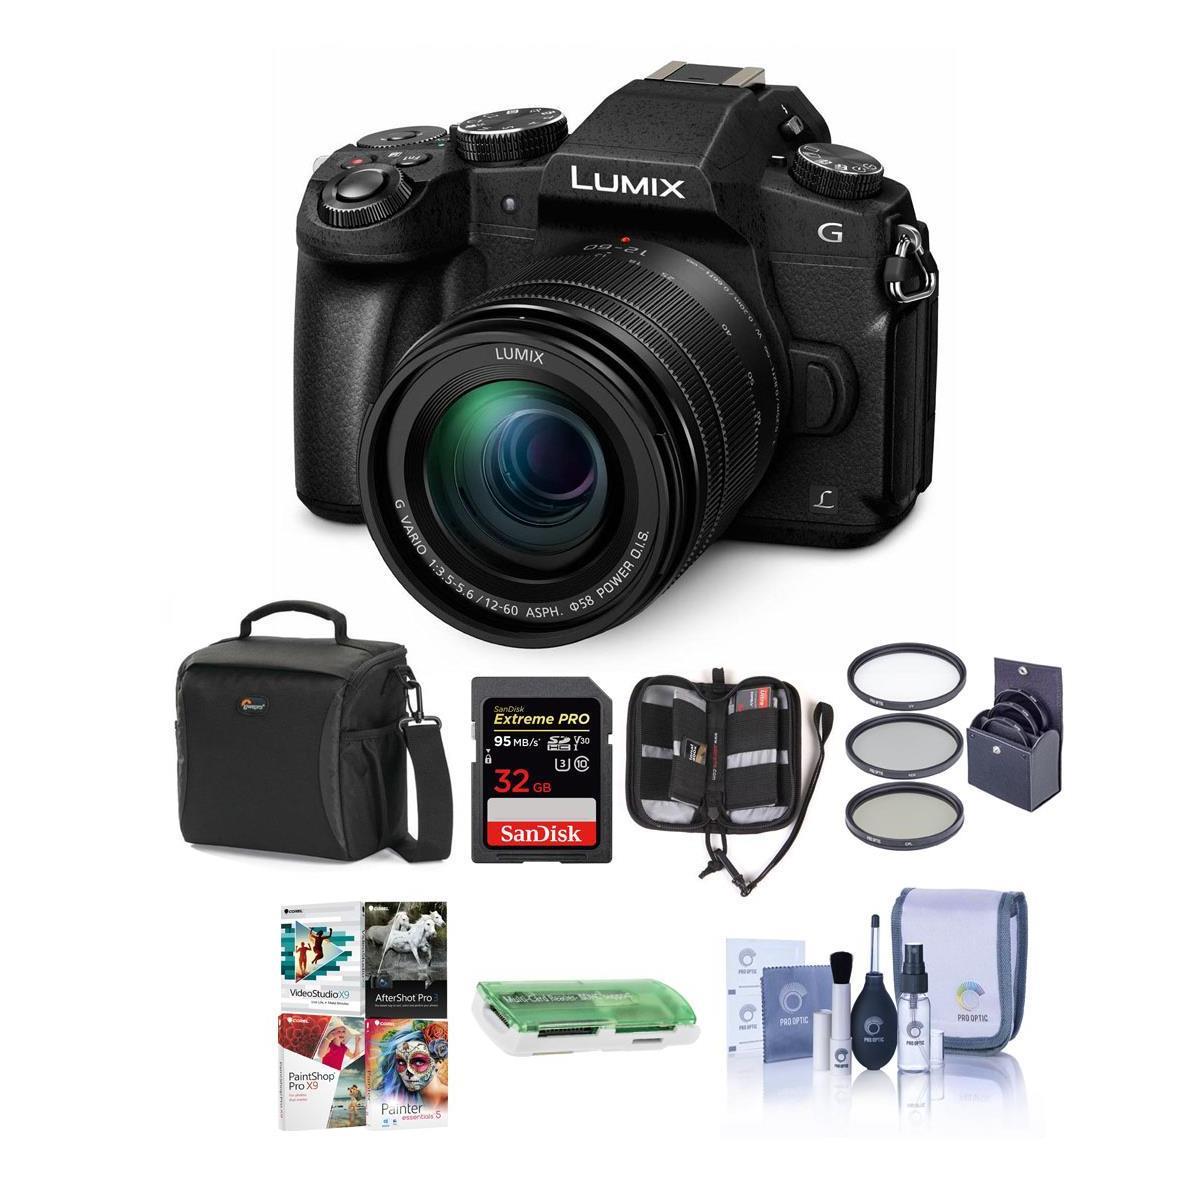 Panasonic Lumix DMC-G85 Mirrorless with 12-60mm OIS Lens and Free Accessories